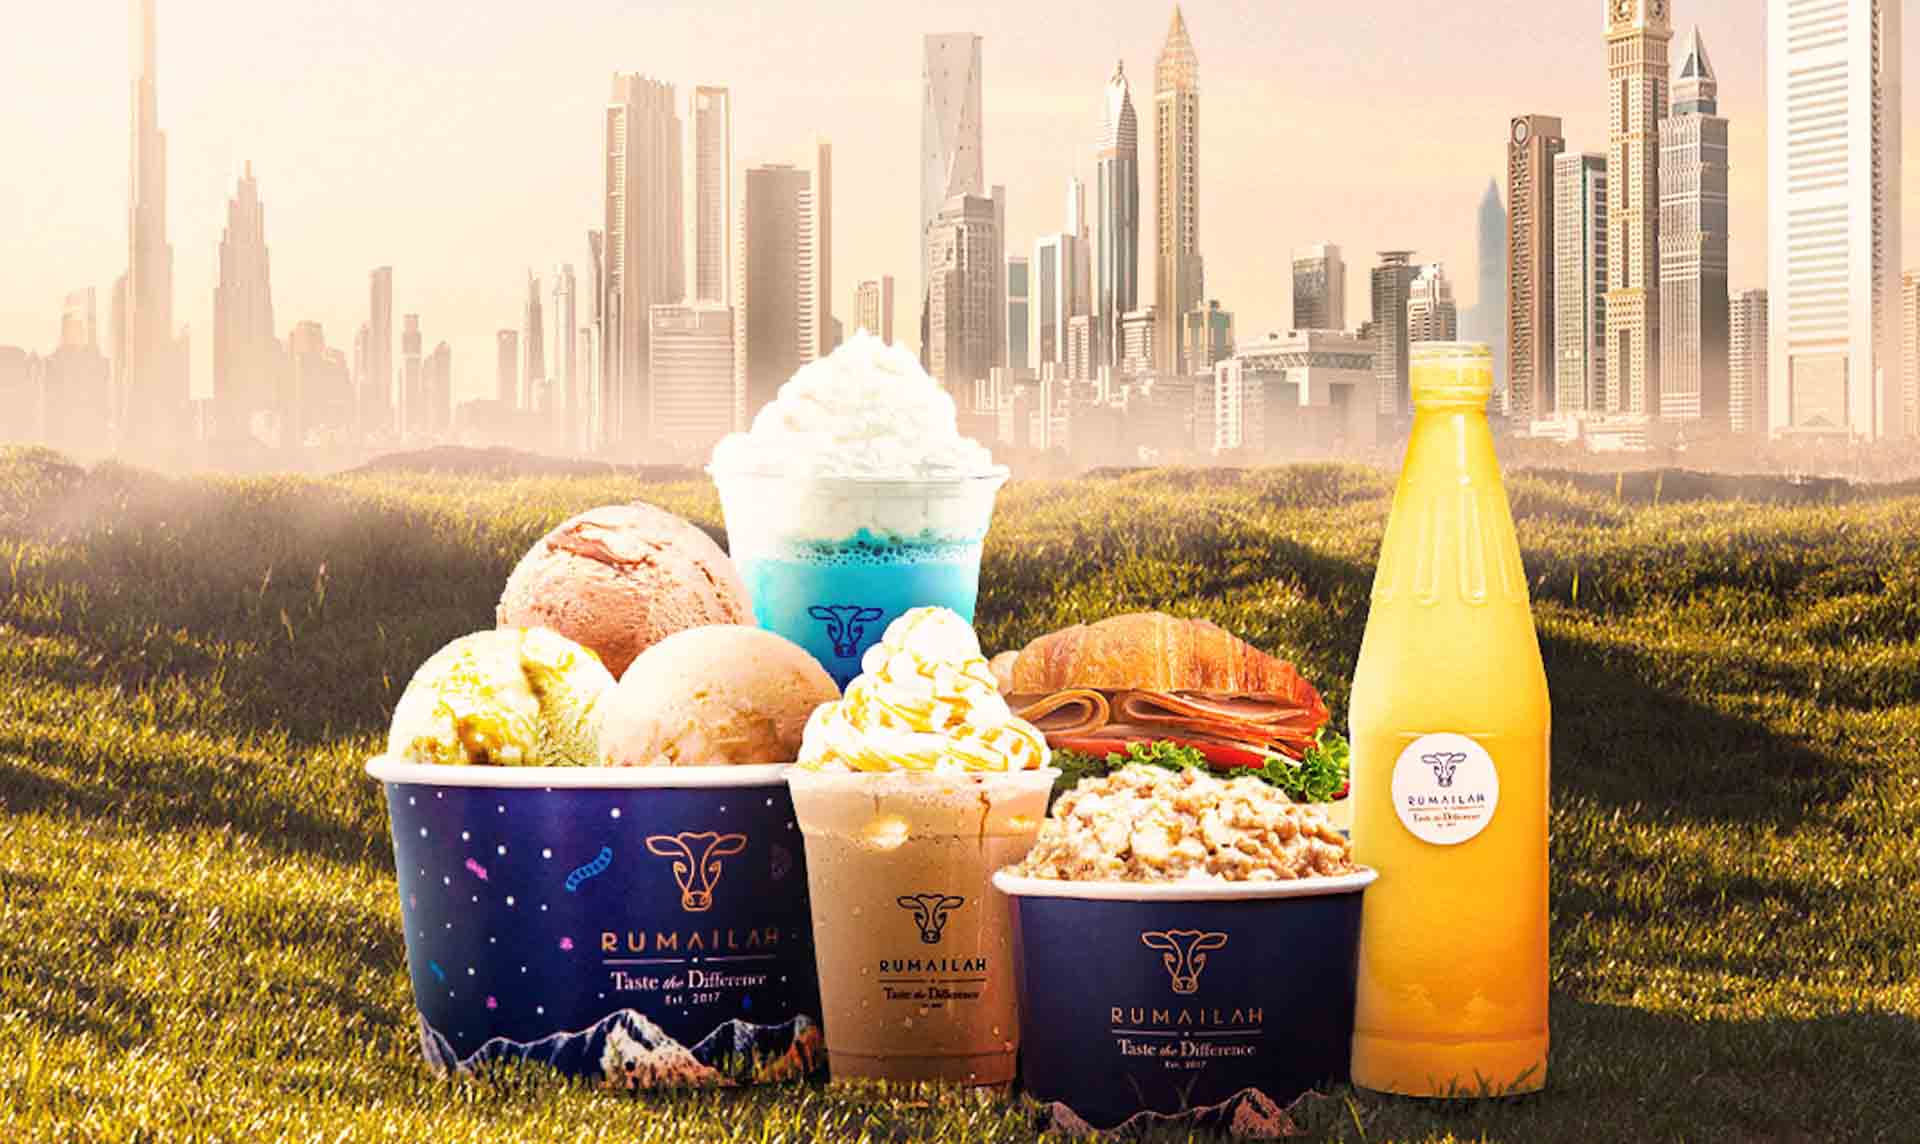 Rumailah Farm Brings “The Milk of Royalty” to Dubai with its Premium Coffee Shop